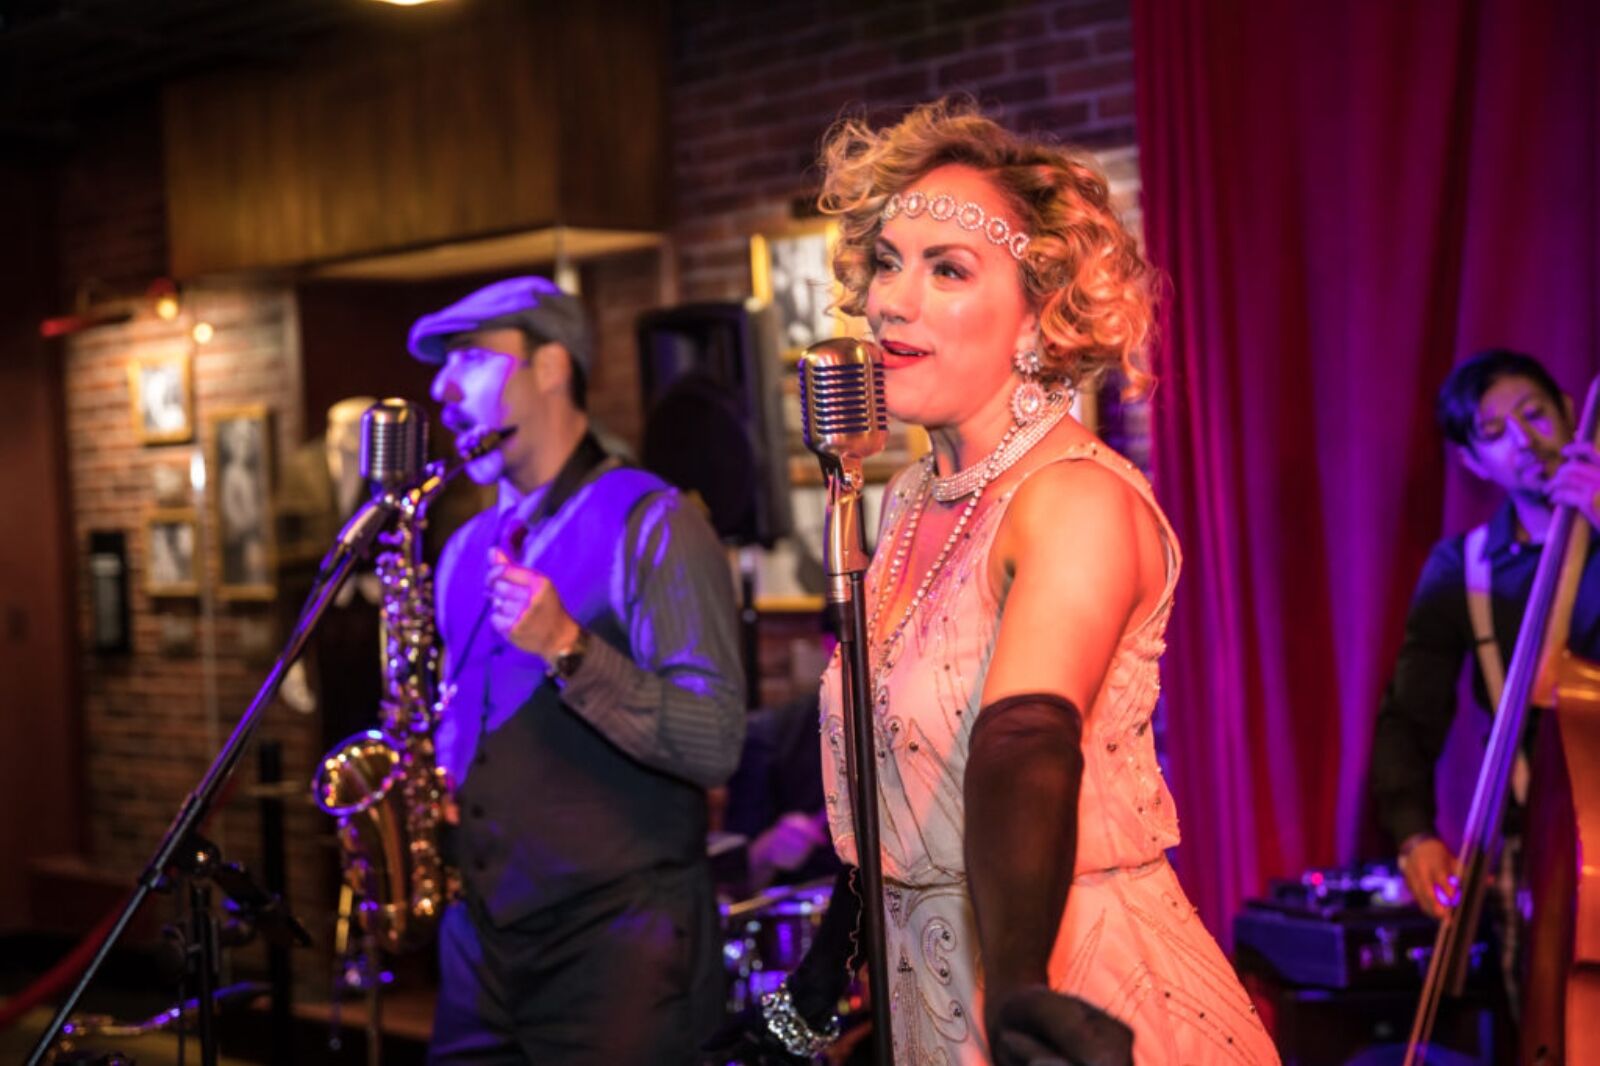 Woman sings with live band in Las Vegas speakeasy The Underground